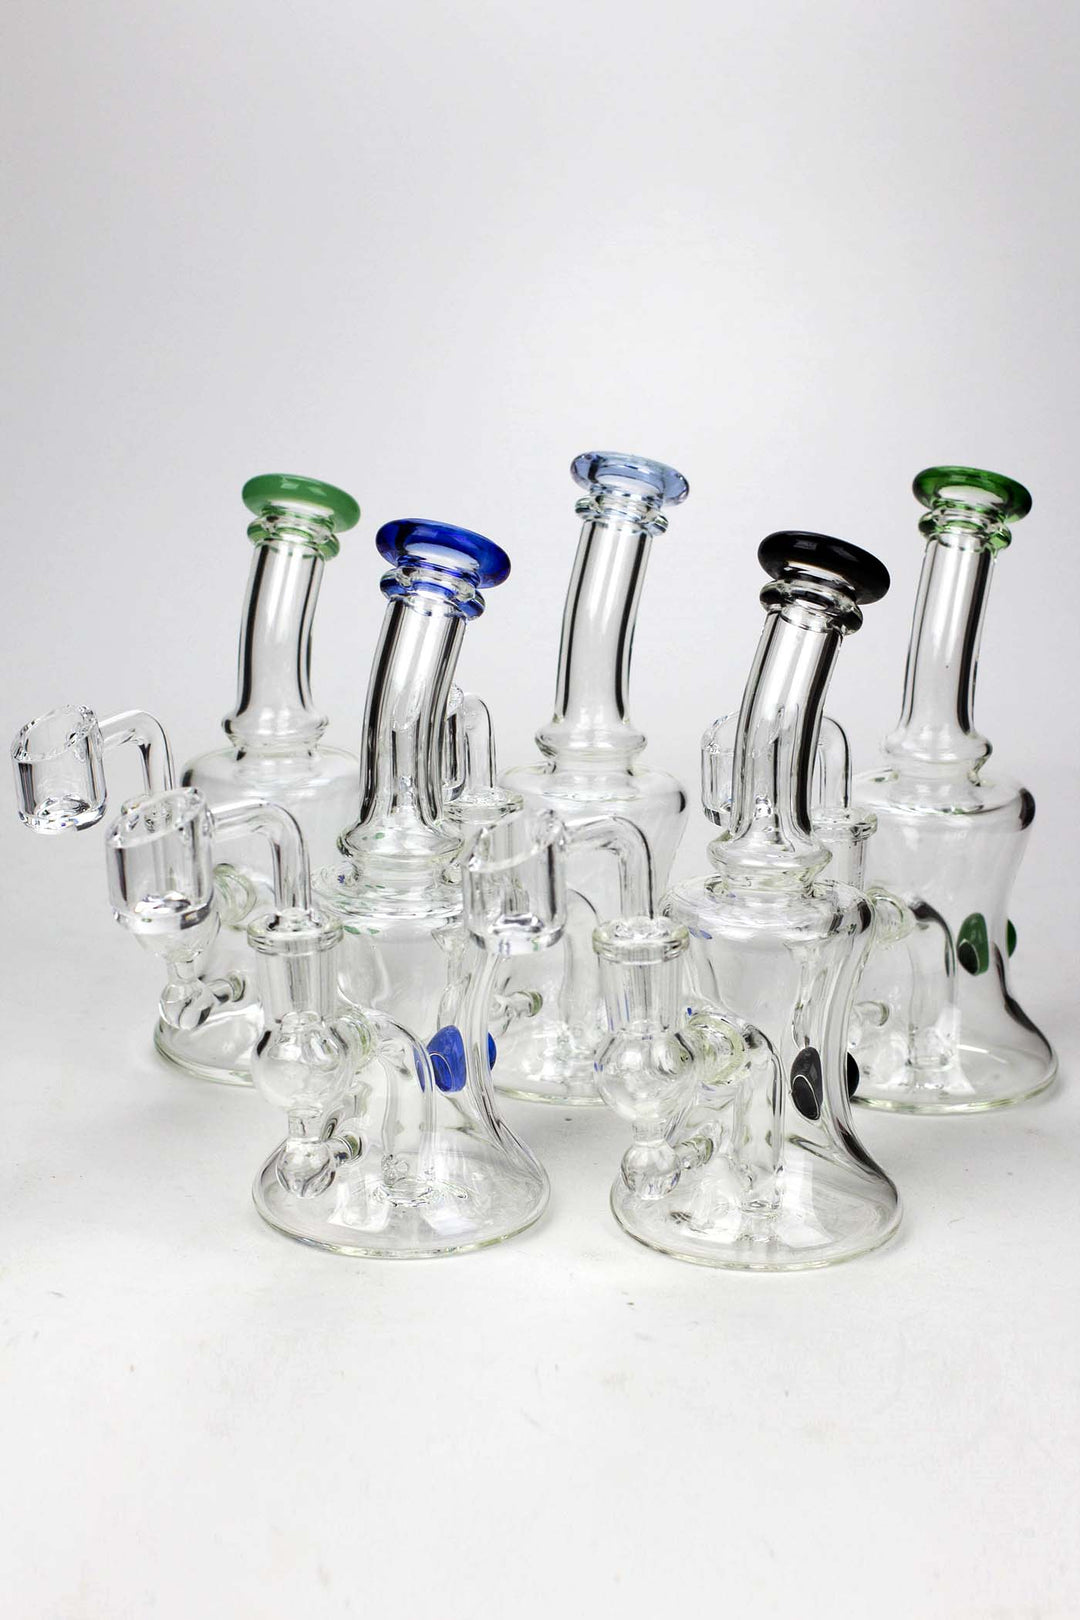 Fixed 3 hole diffuser skirt bubbler_0